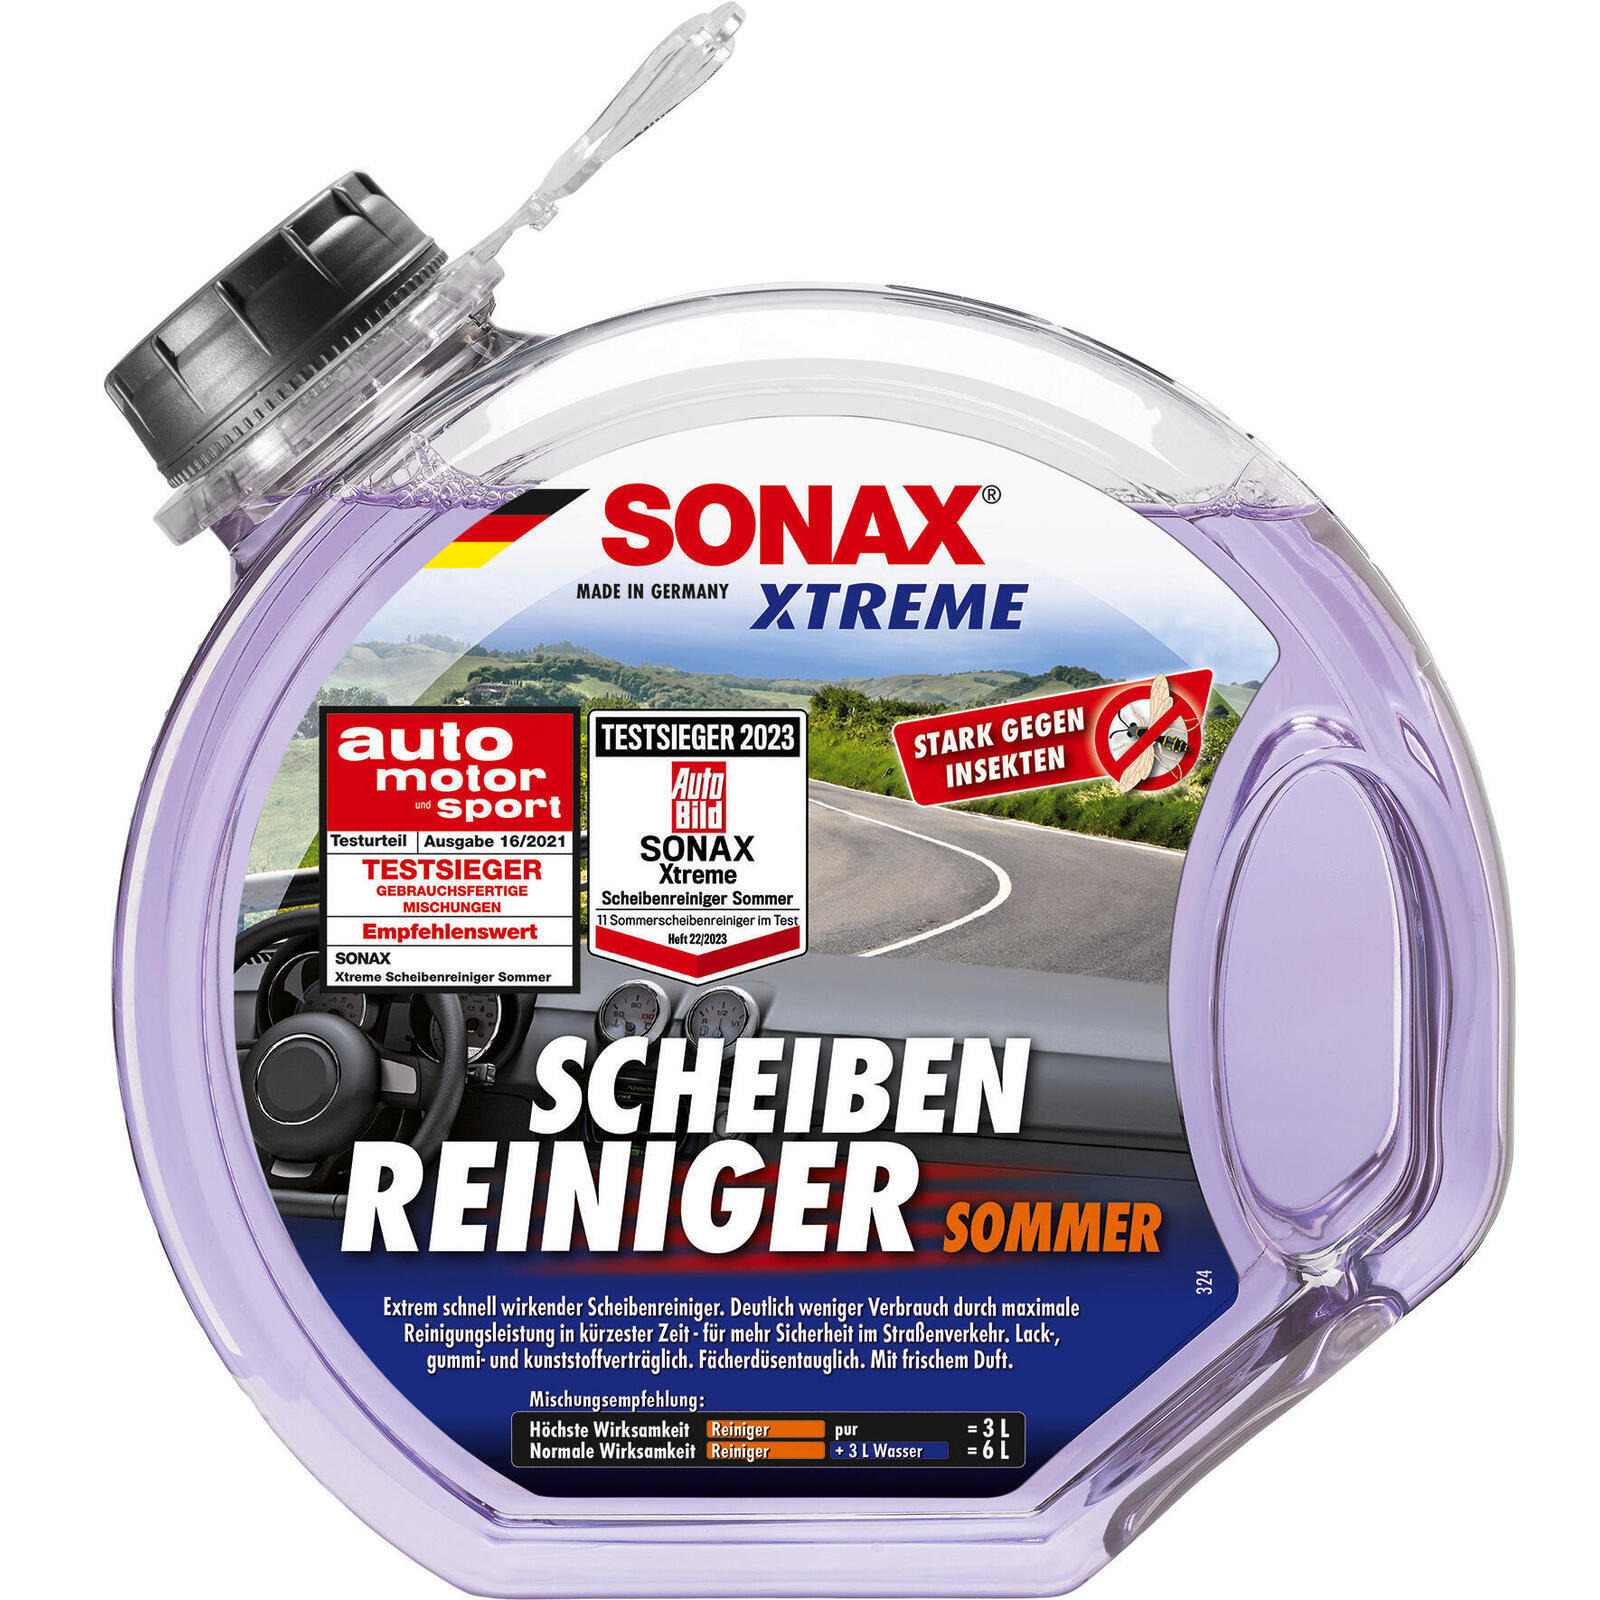 SONAX Cleaner, window cleaning system XTREME Windscreen Wash ready-to-use